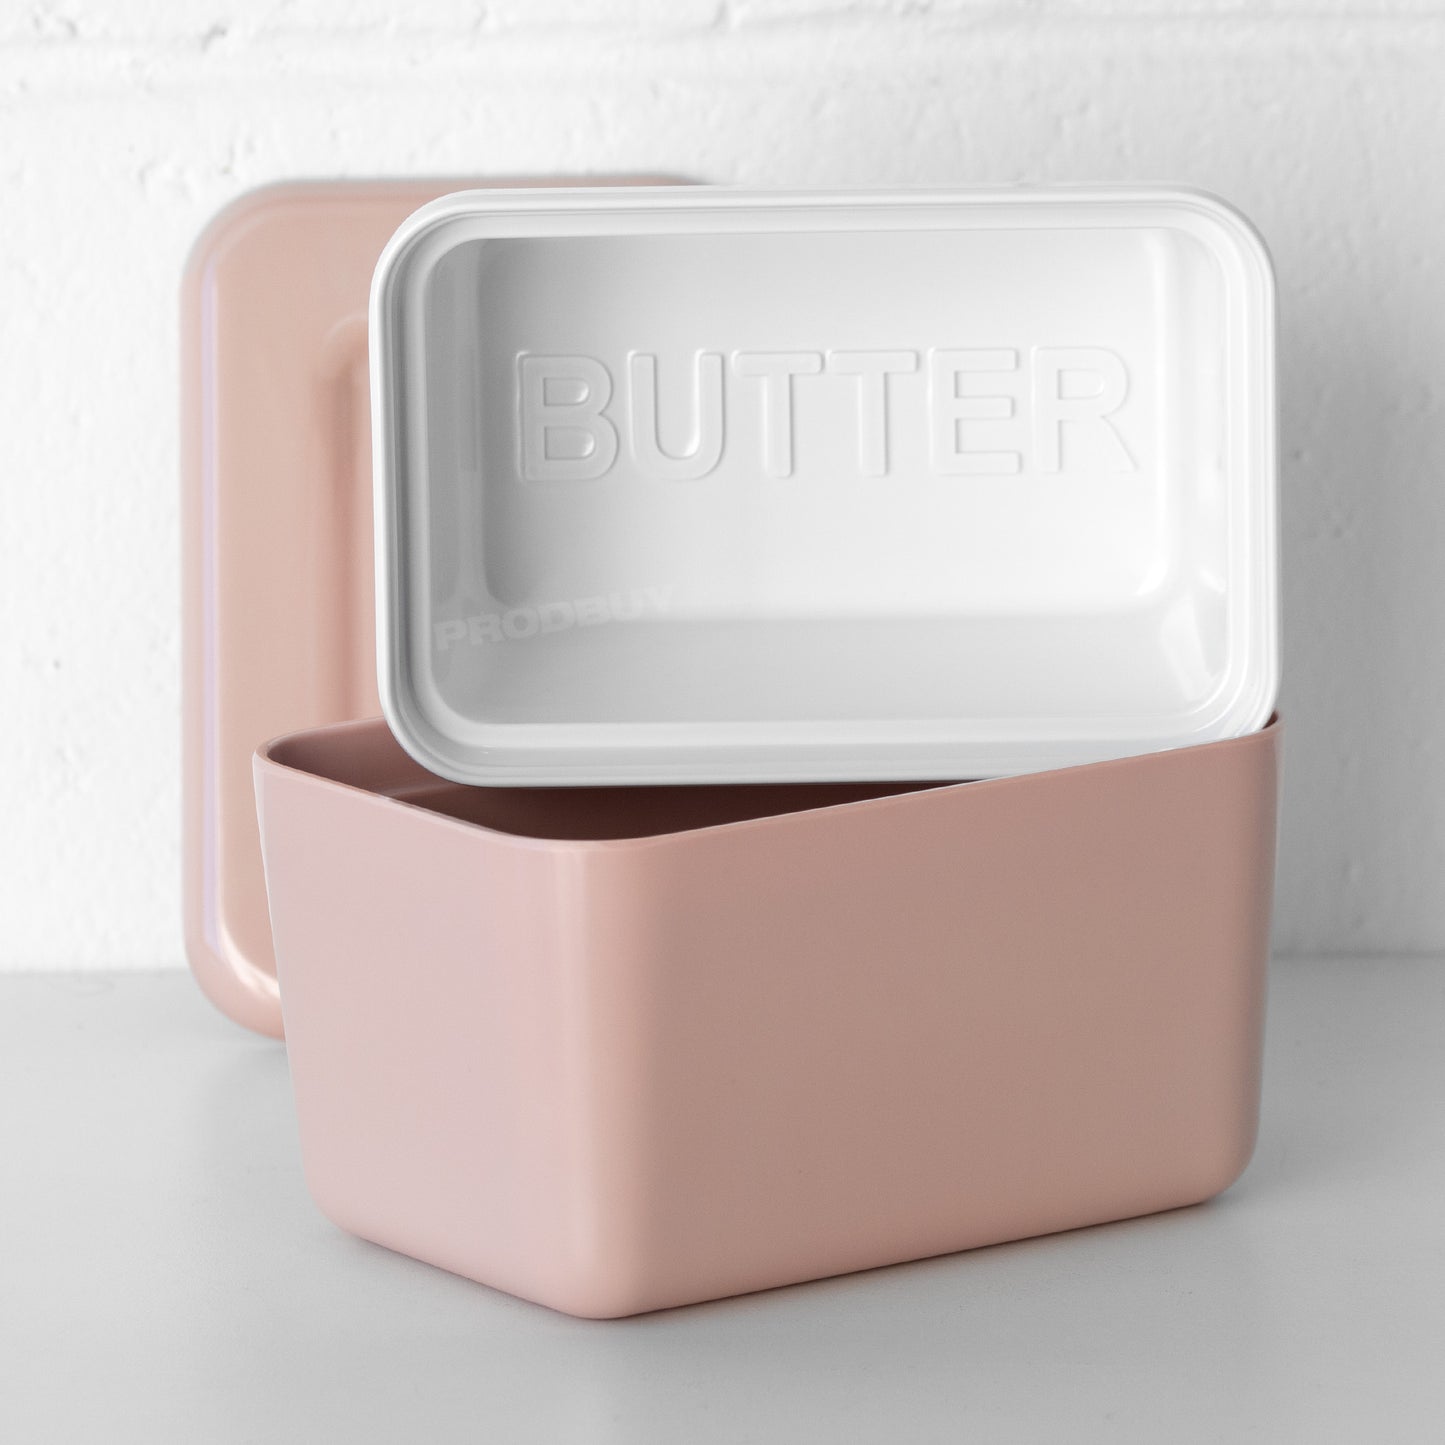 Pastel Pink Melamine Butter Storage Dish with Lid